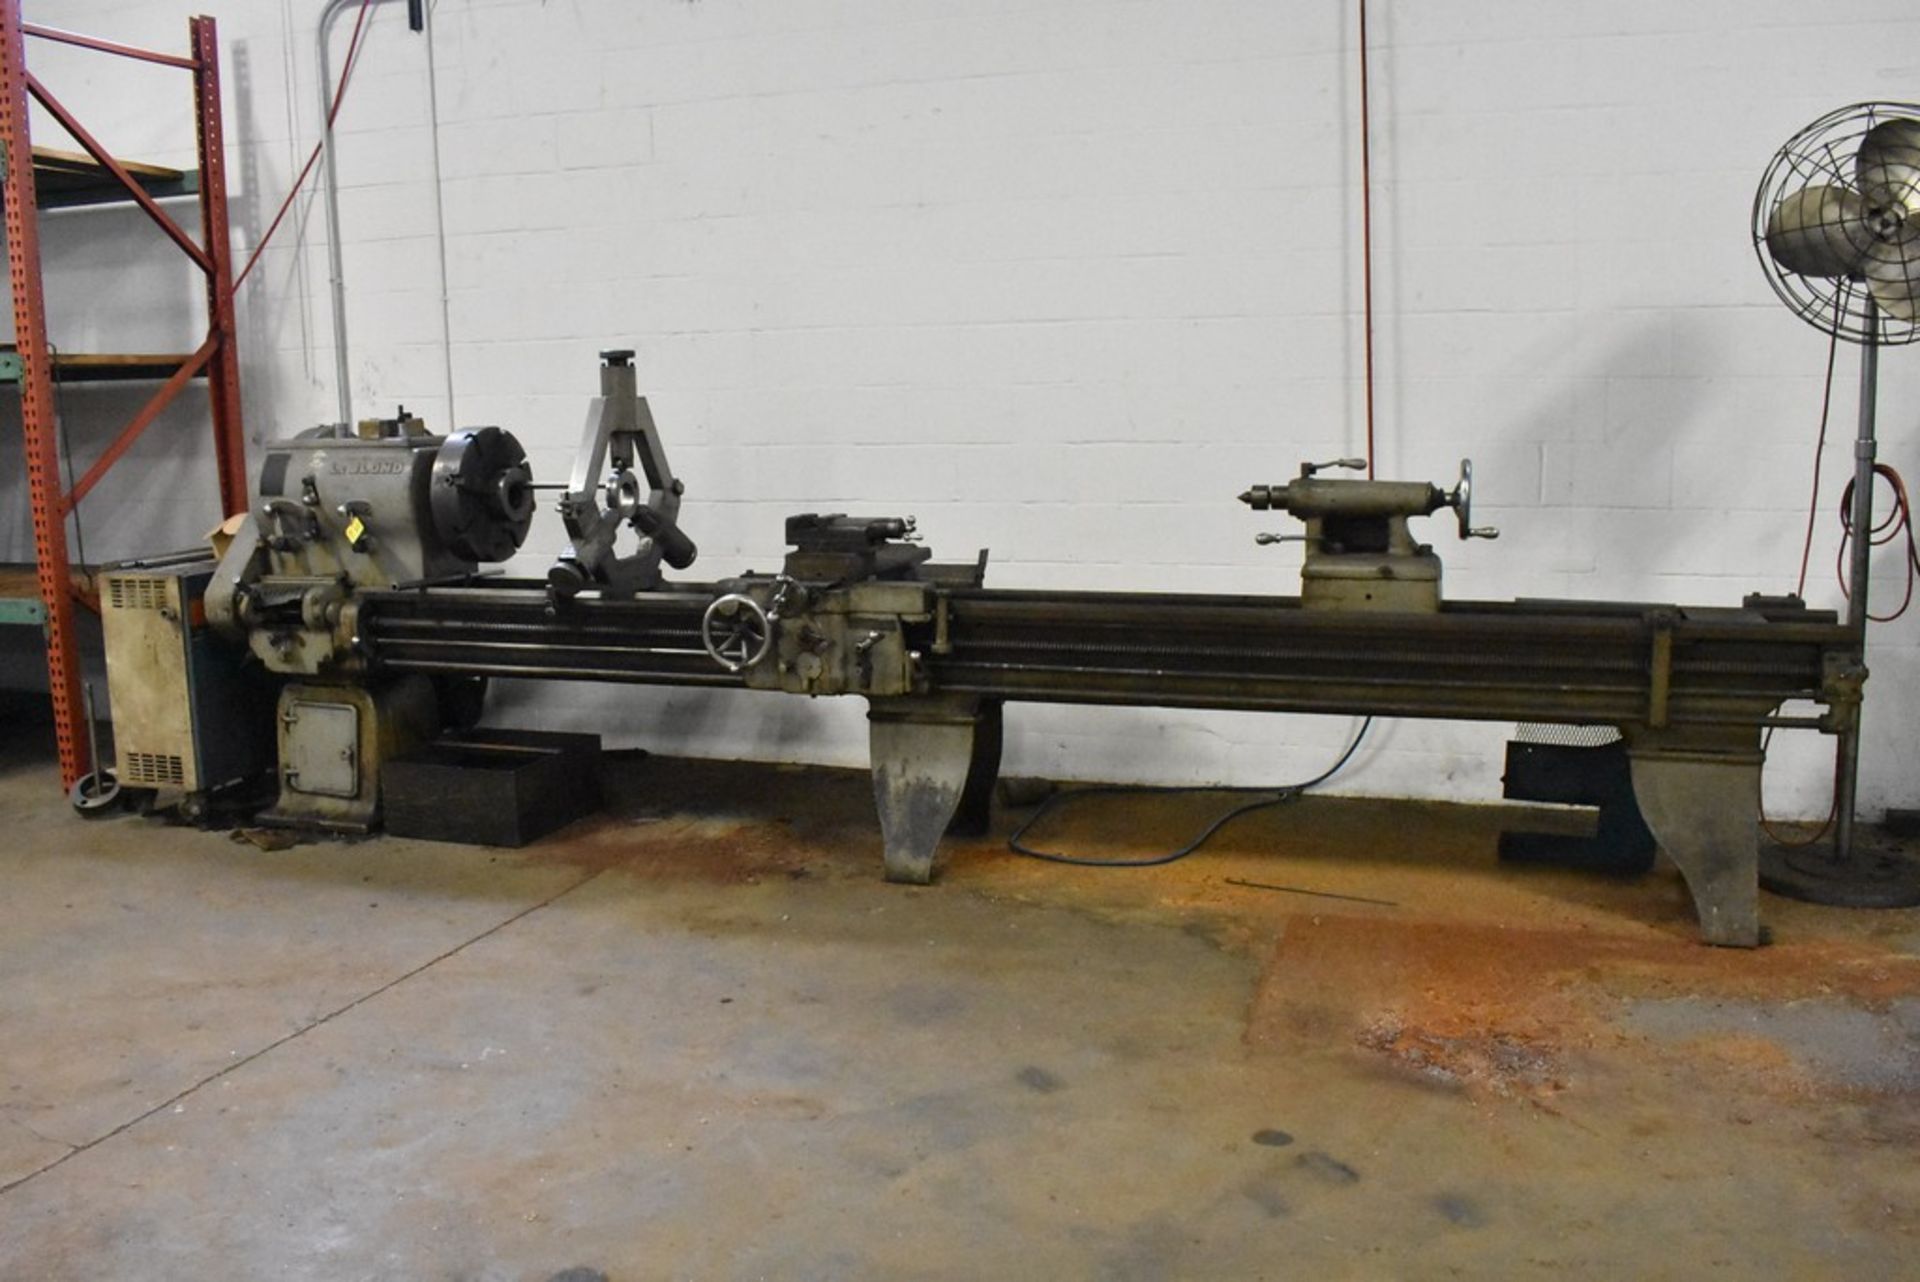 LEBLOND 22"X144" TOOLROOM LATHE, S/N H485, 350 SPINDLE RPM, WITH 18" 3-JAW CHUCK, TAPER - Image 8 of 8